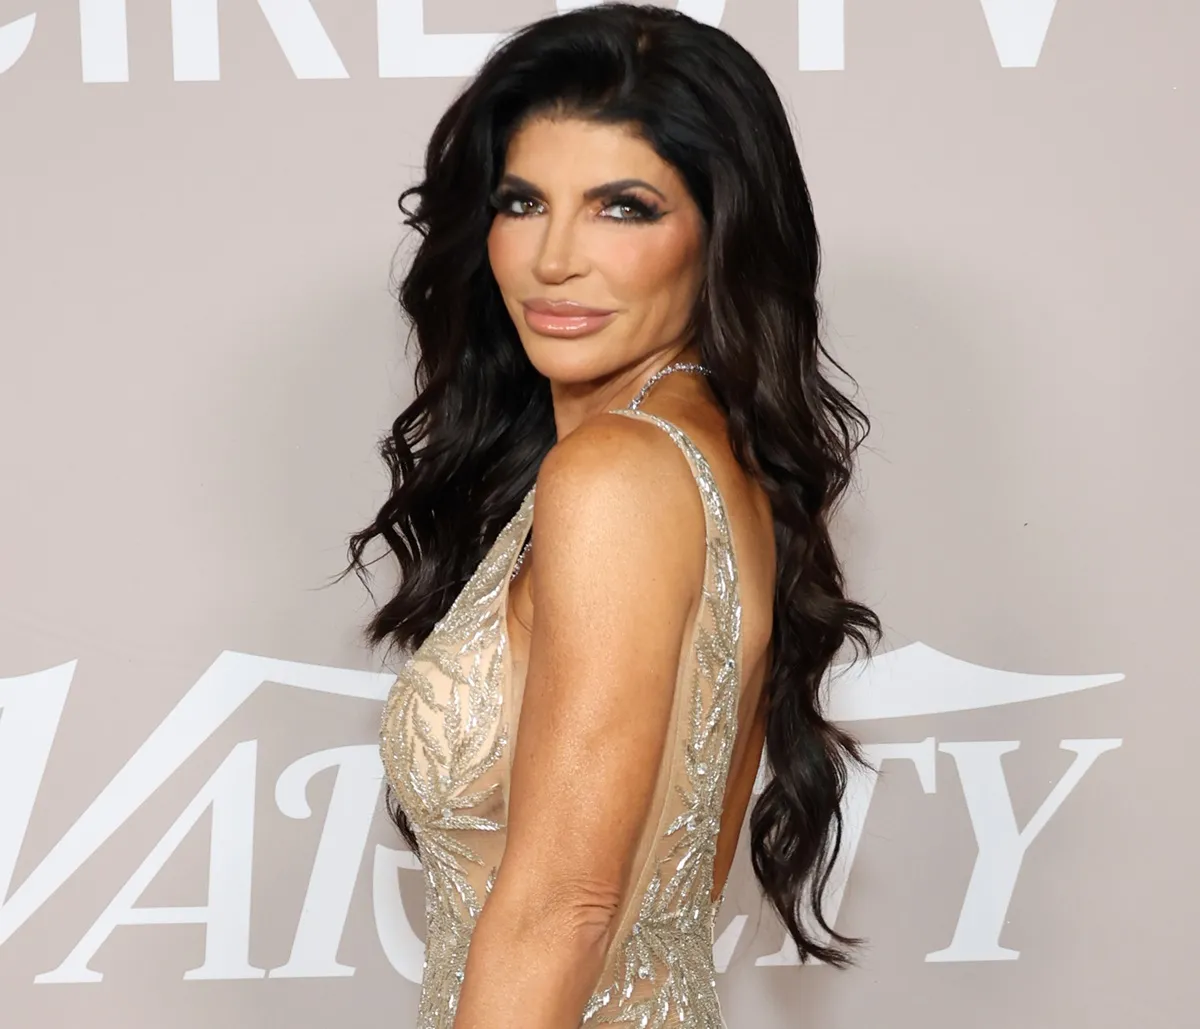 Teresa Giudice Confirms She's Not Leaving 'The Real Housewives of New Jersey' Until Bravo Tells Her To